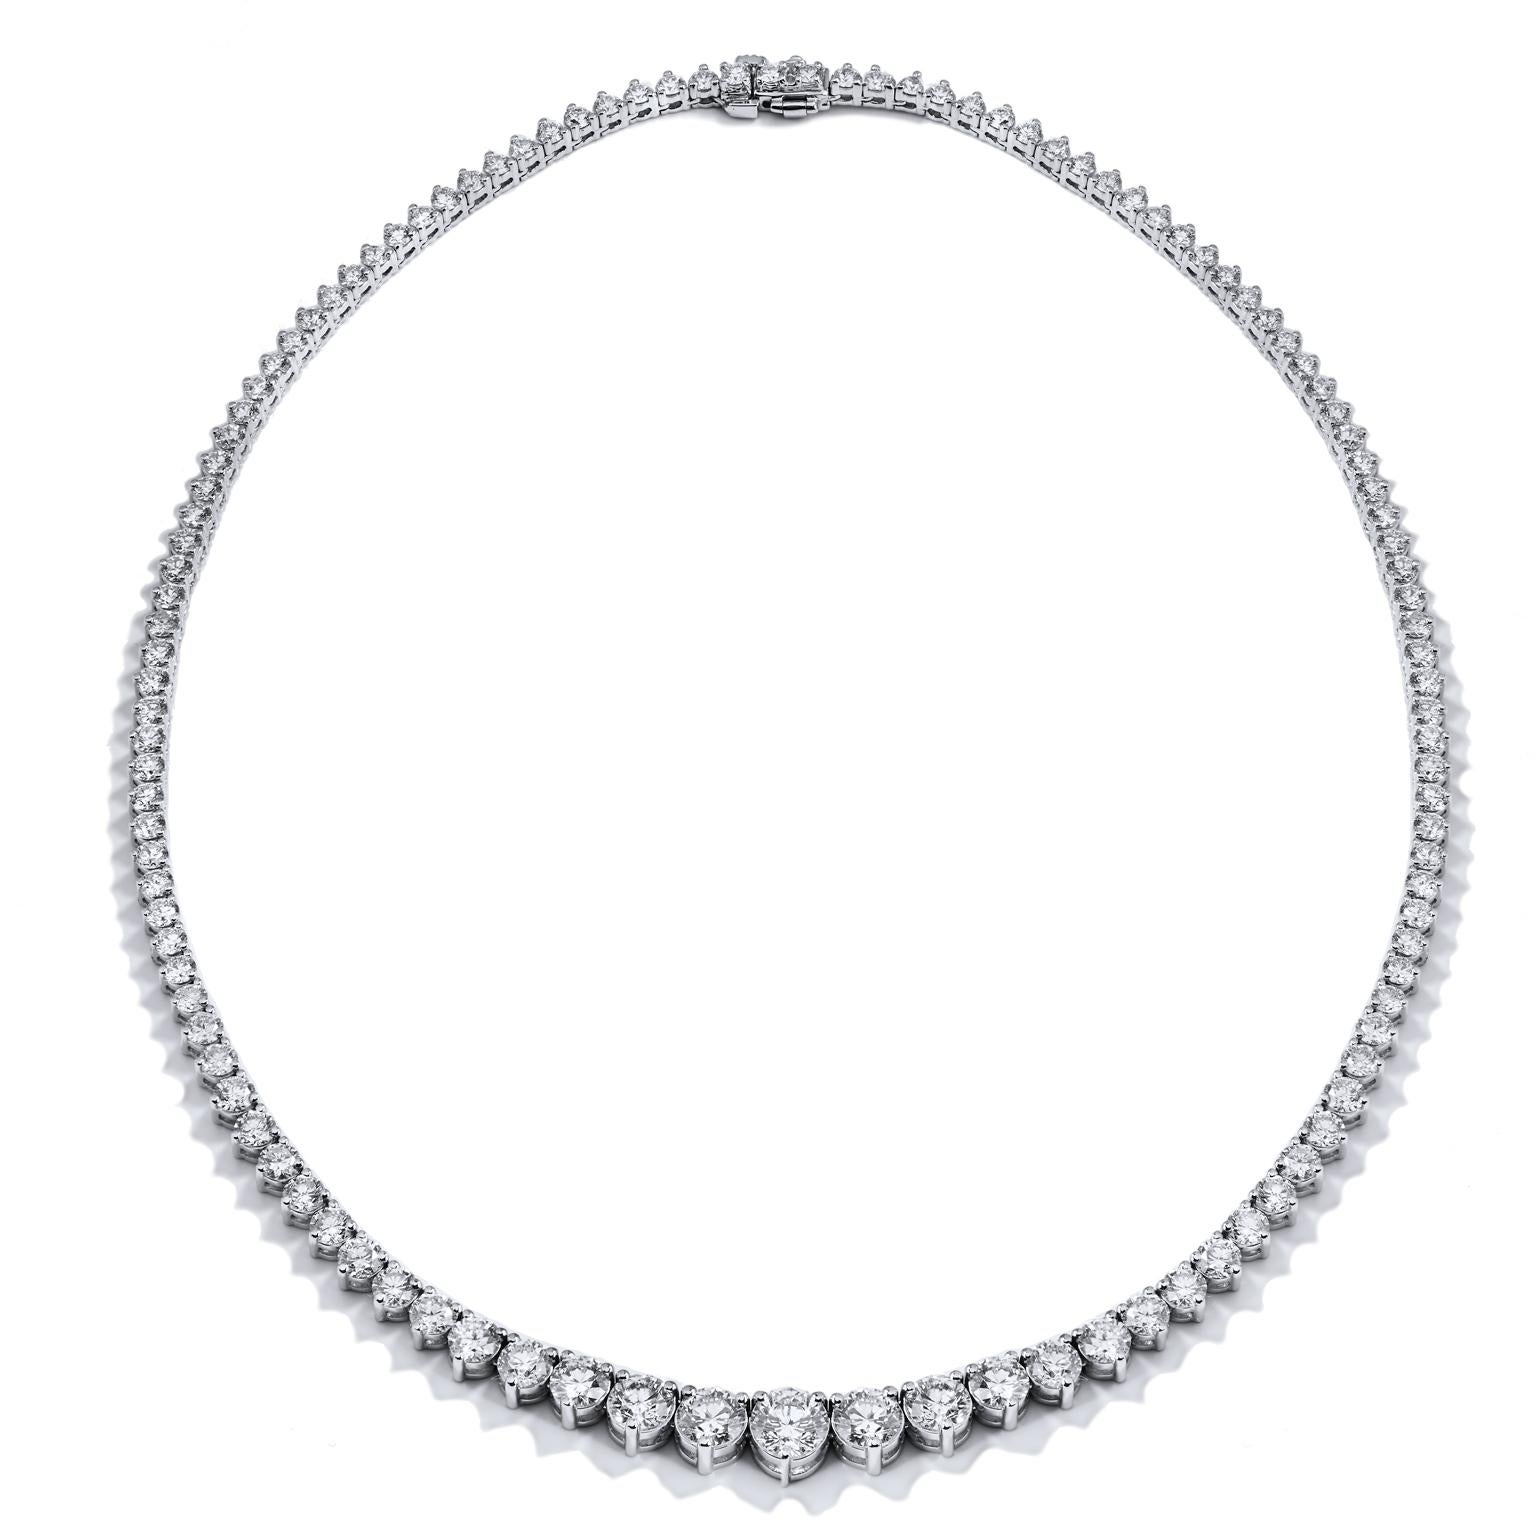 10.13 Carat Diamond Riviera Necklace set in 18 Karat White Gold 16.5 inches Long

A diamond necklace never goes out of style, and neither will this stunning 16.5 inch 18 karat white gold Riviera necklace displaying 138 pieces of round brilliant cut